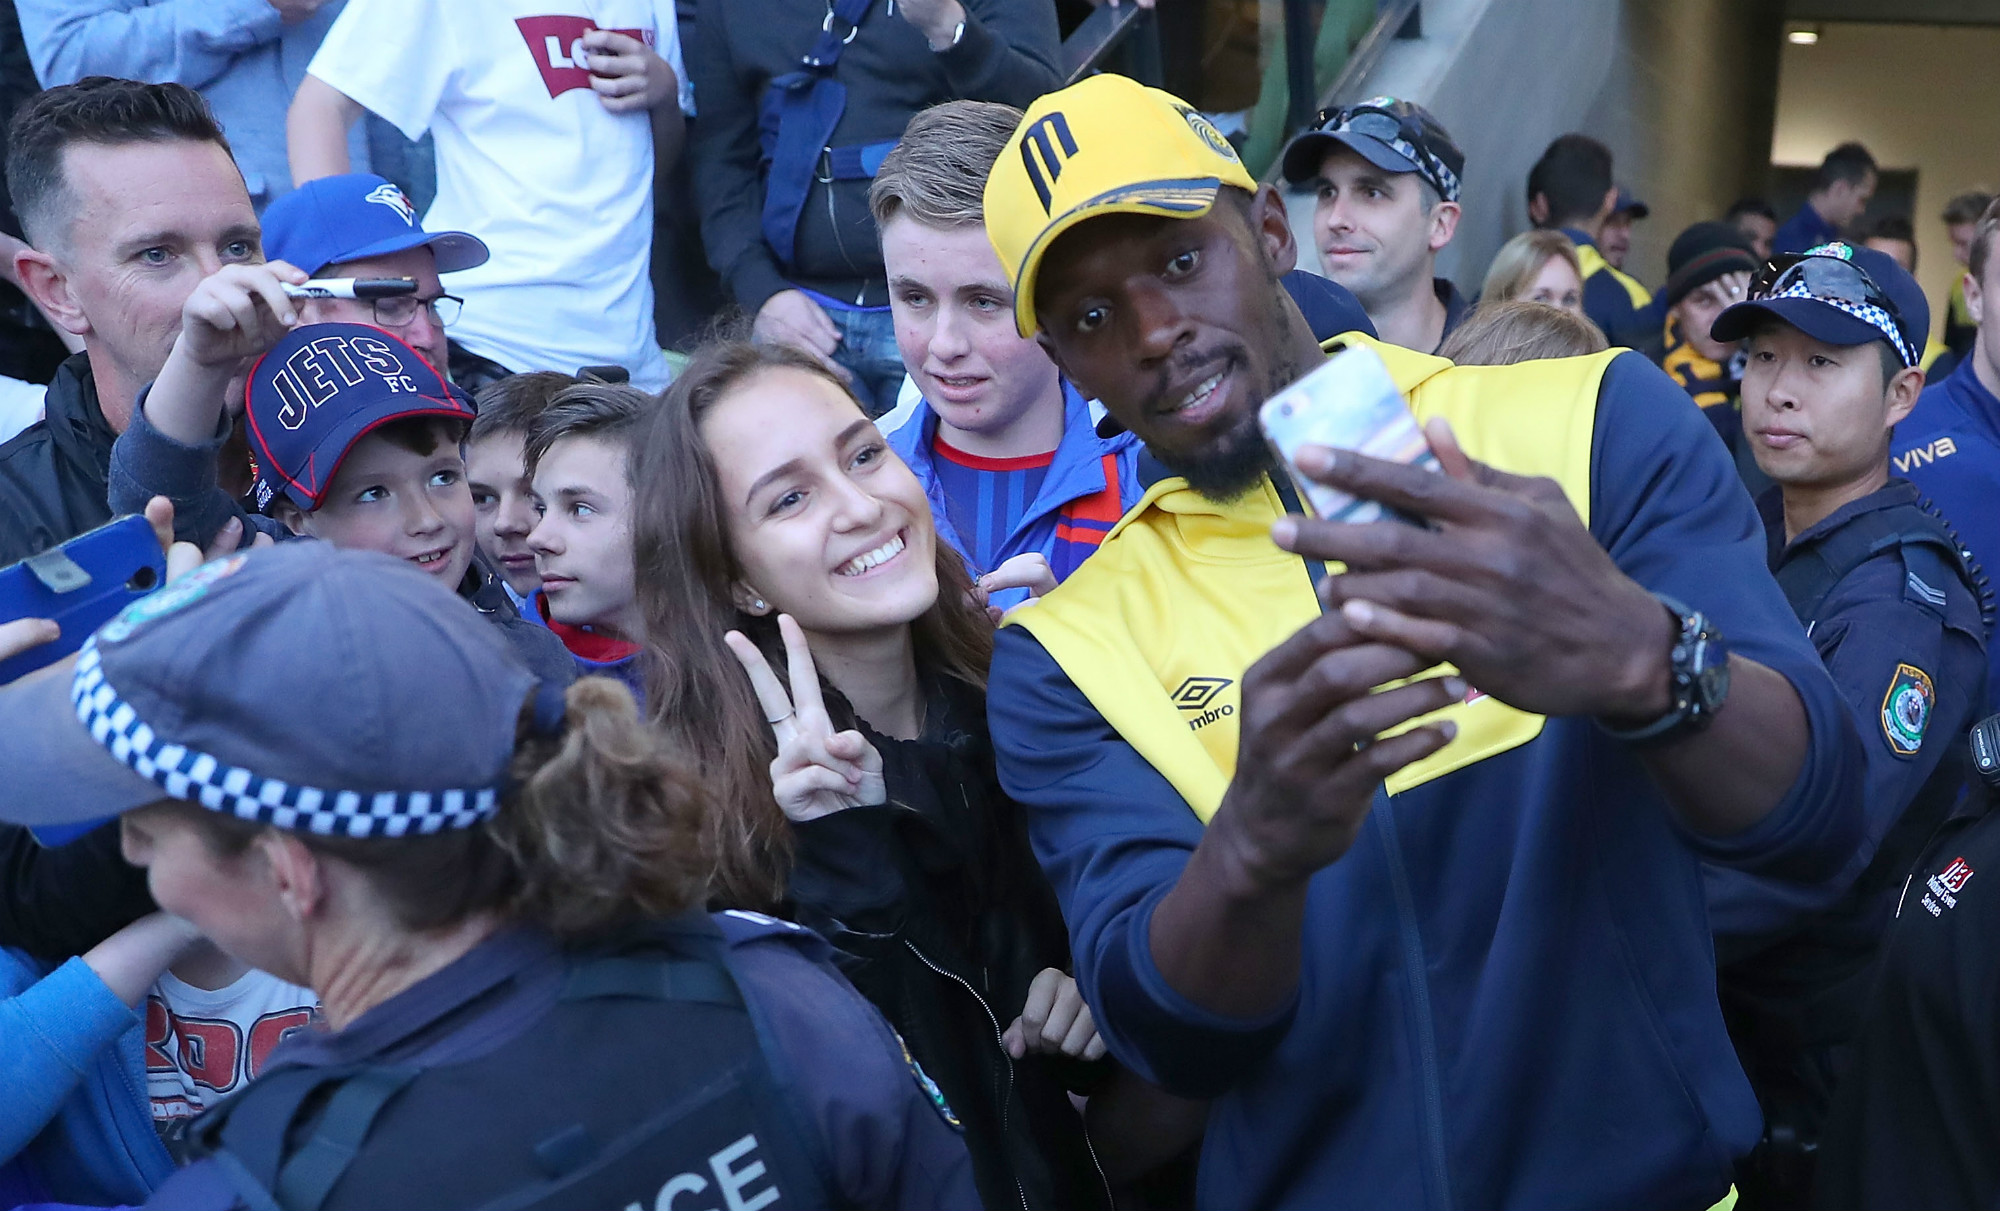 Bolt snaps selfies with fans from the sidelines in Maitland